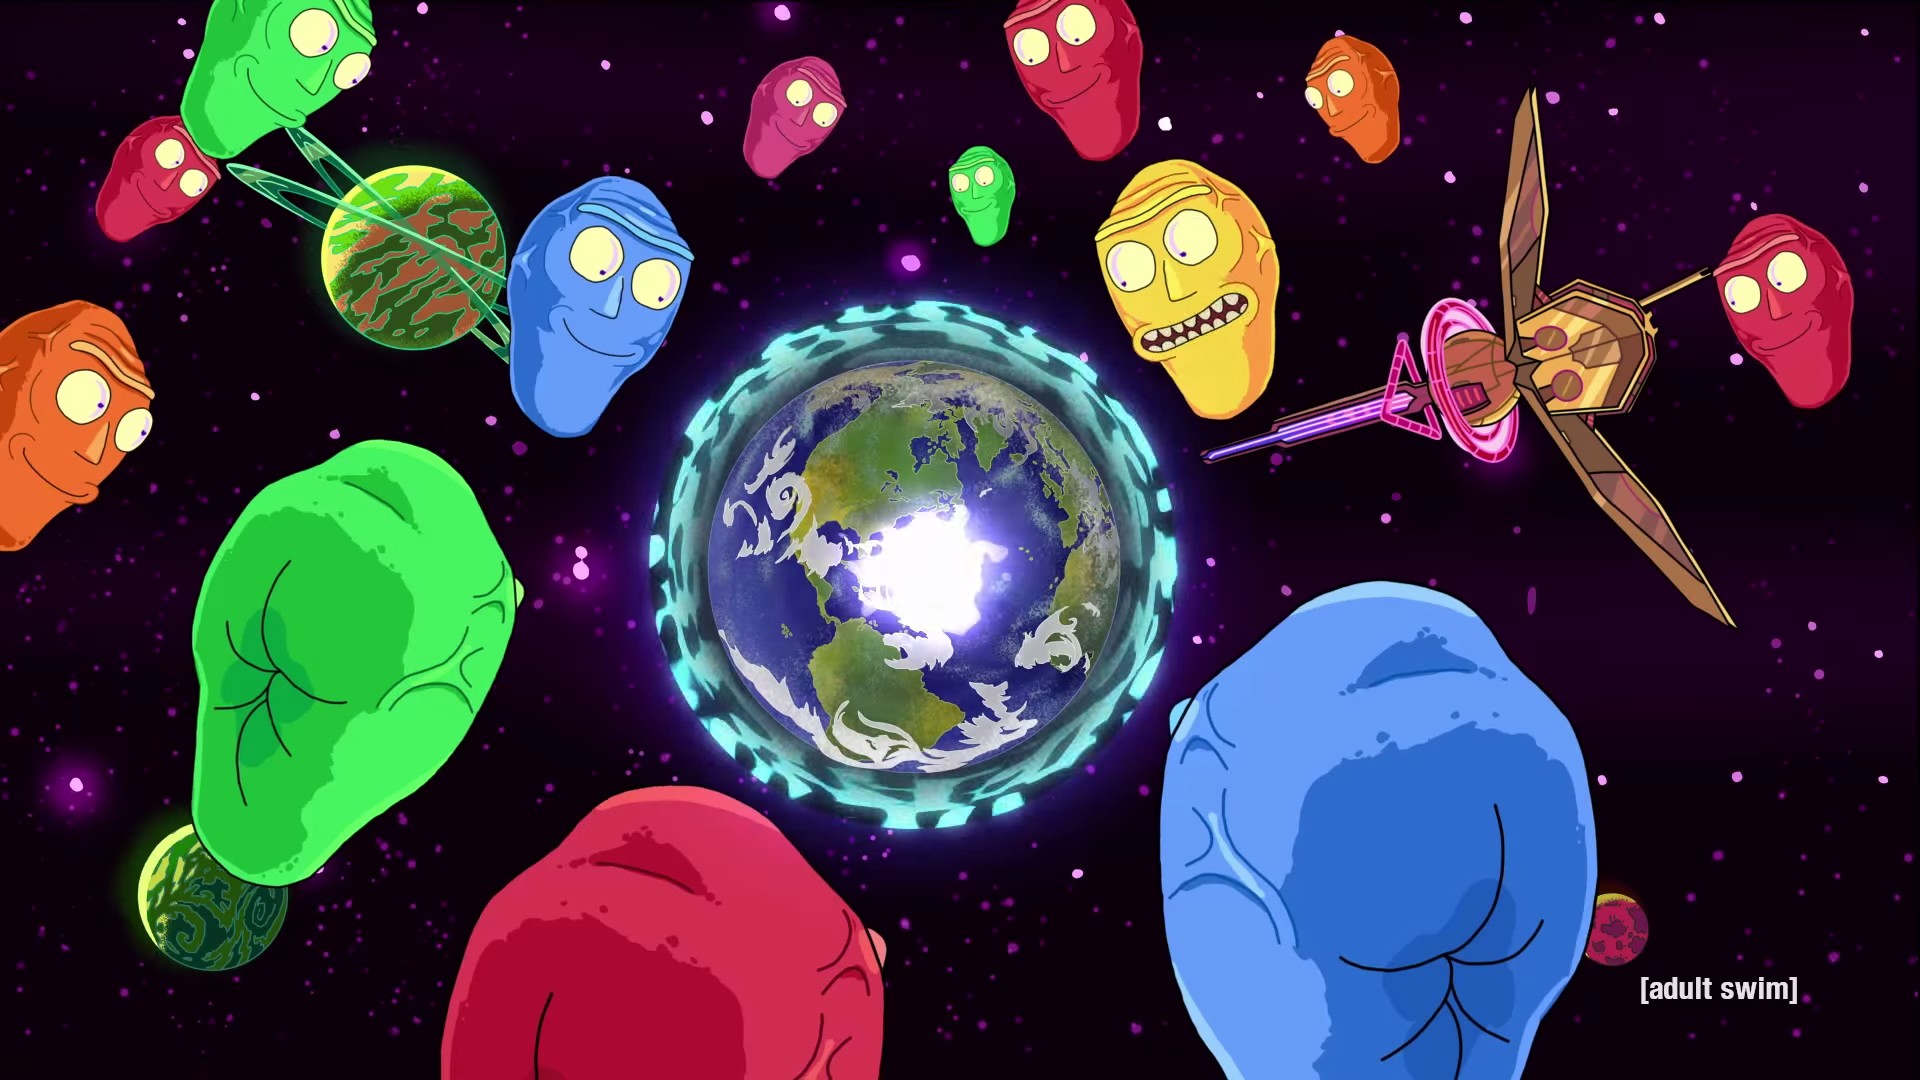 Rick and Morty, Show me what you got, Floating heads Wallpapers HD / Desktop and Mobile Backgrounds